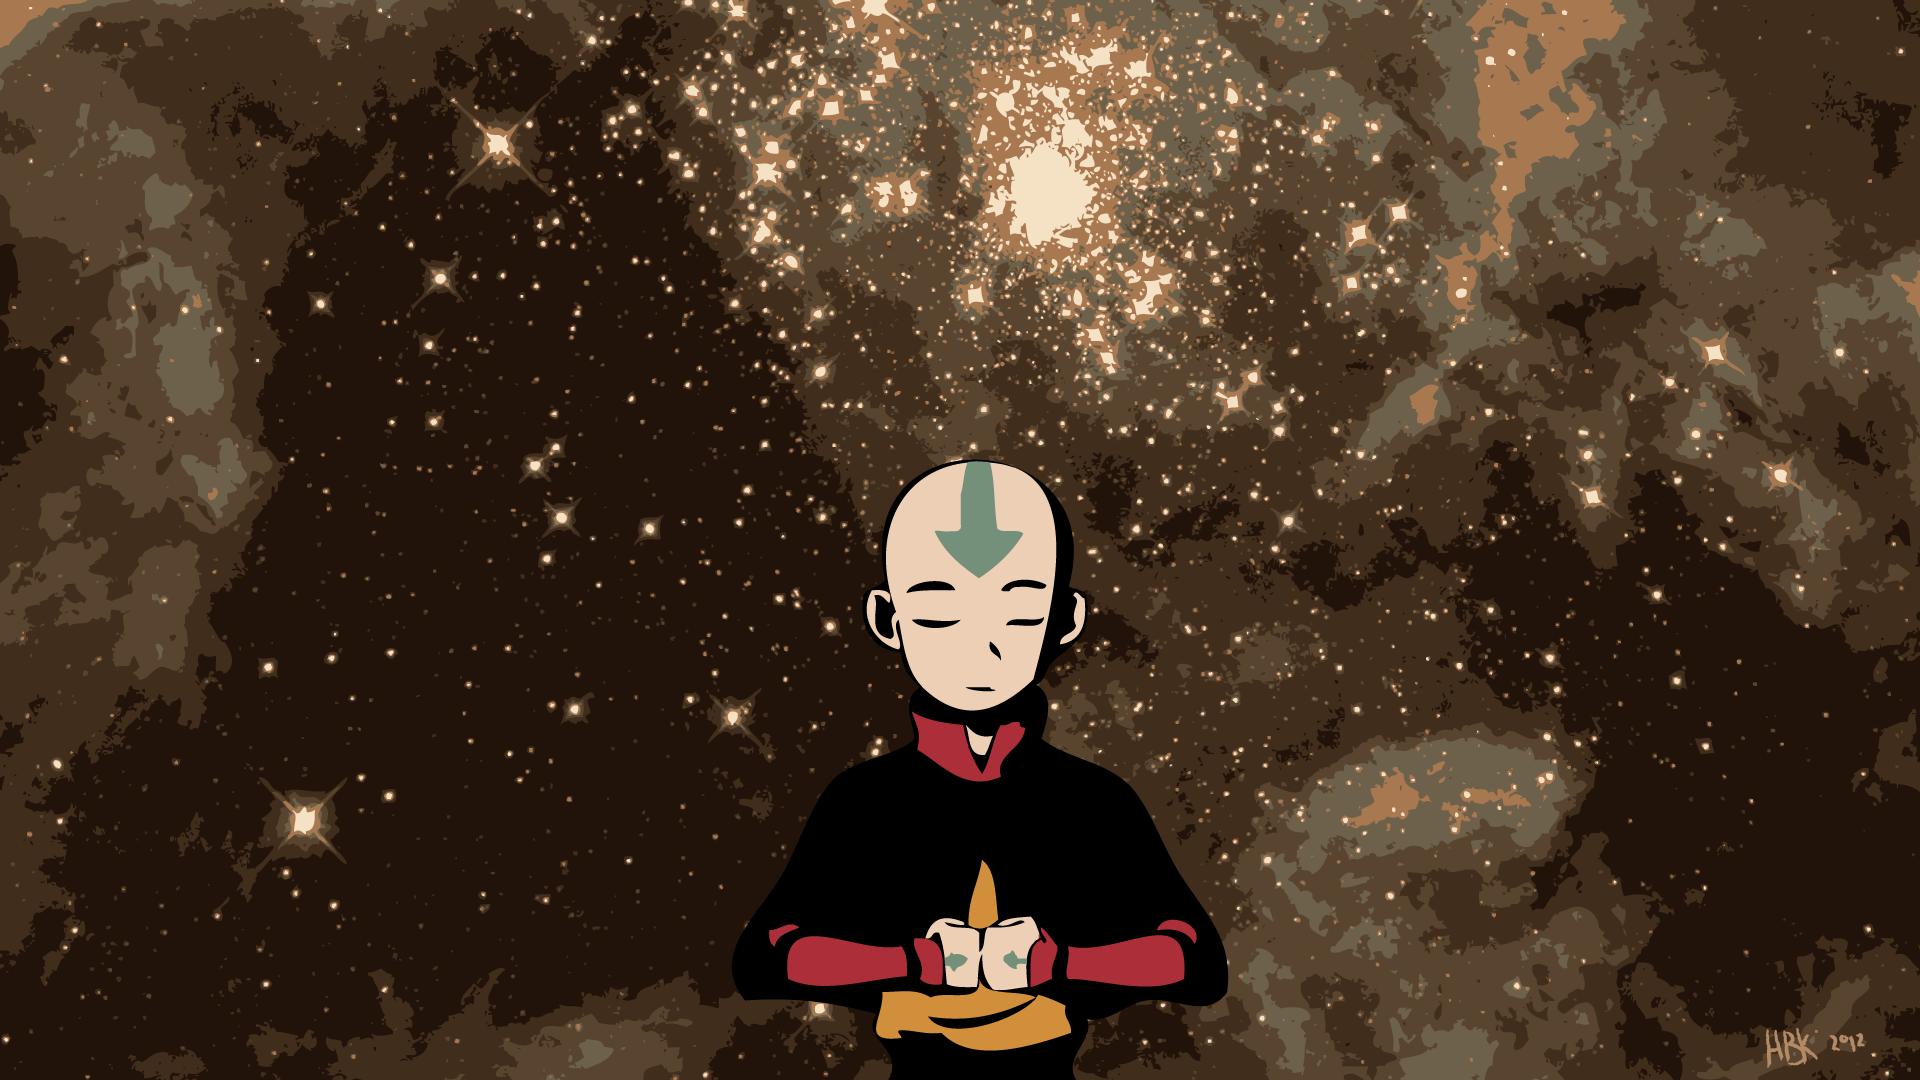 Best 39+ Avatar: The Last Airbender Wallpapers on HipWallpapers